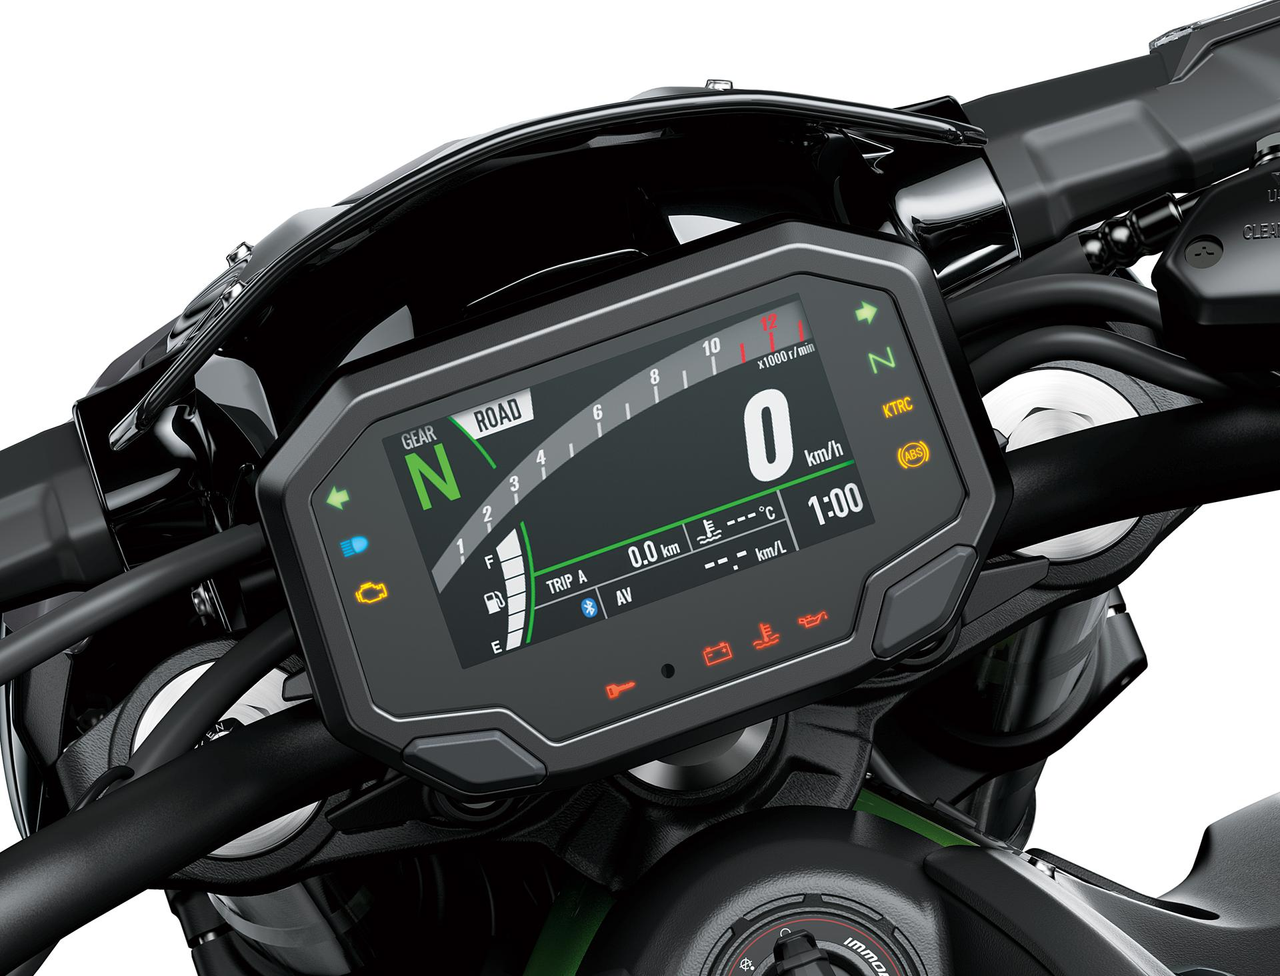 Integrated Riding Modes